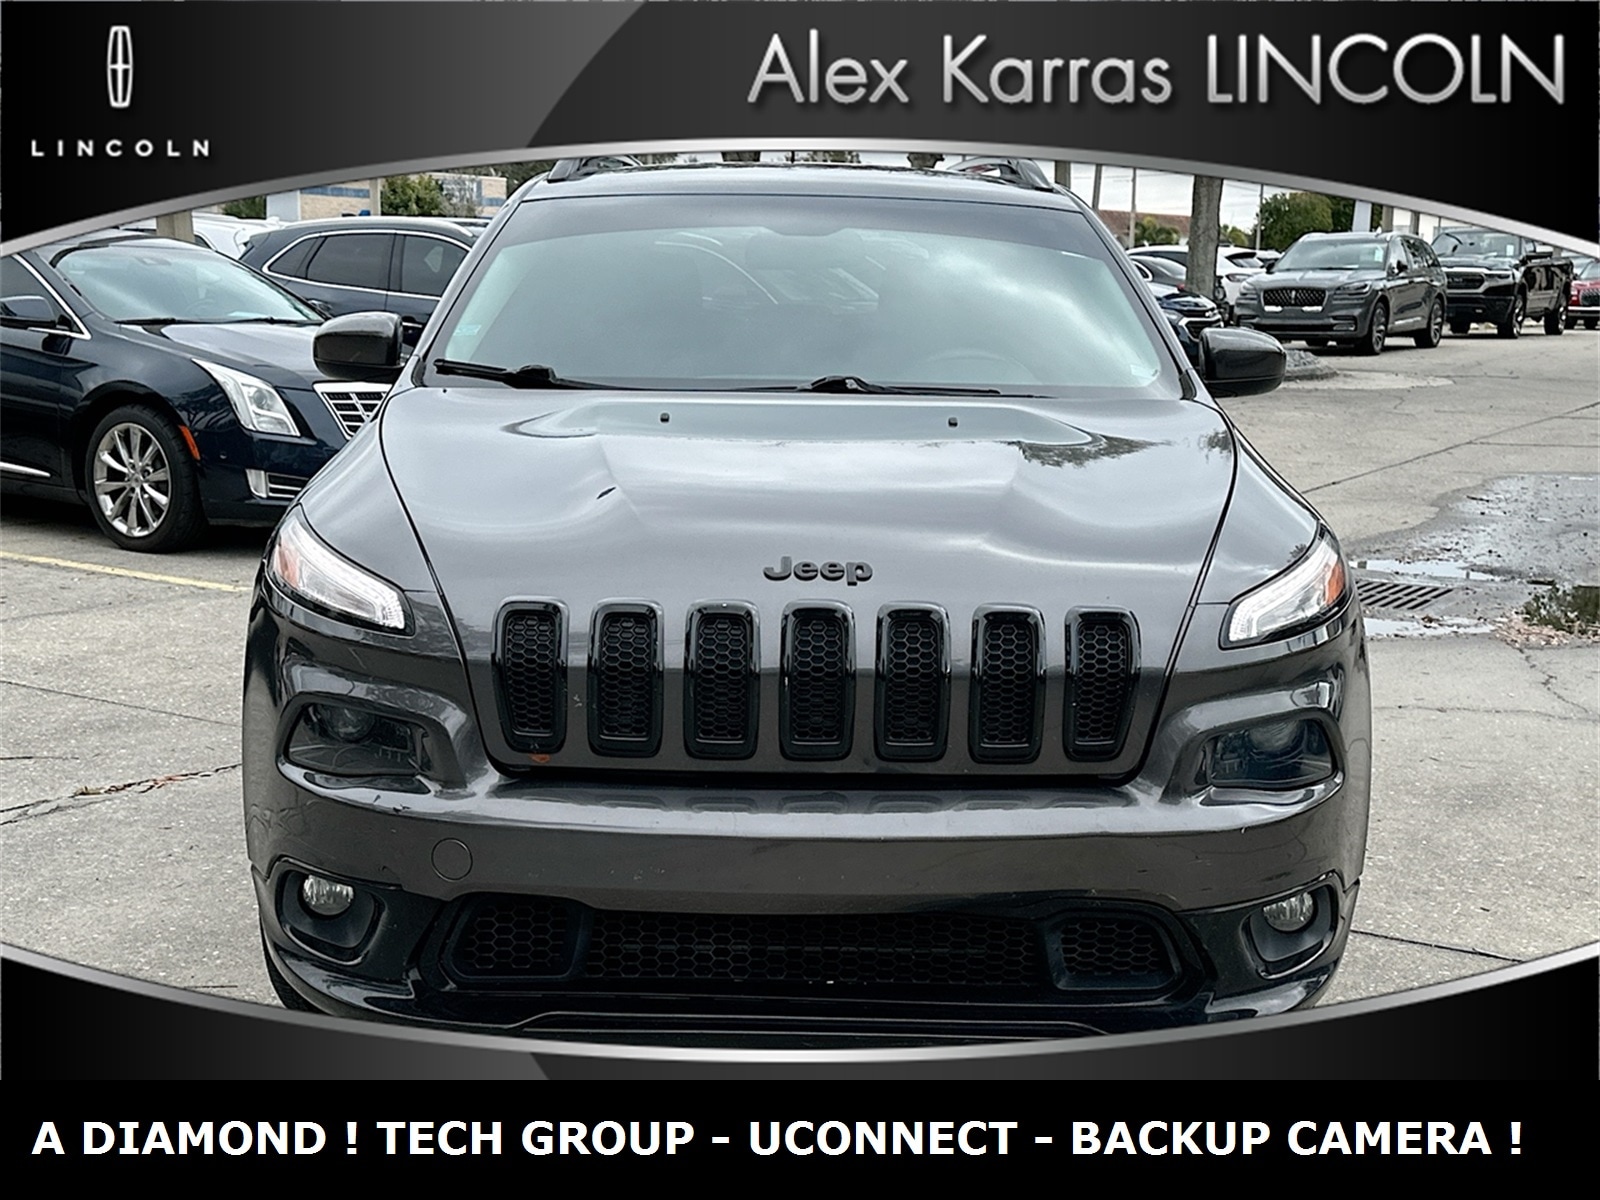 Used 2018 Jeep Cherokee Tech Connect with VIN 1C4PJLCX8JD605173 for sale in Bradenton, FL